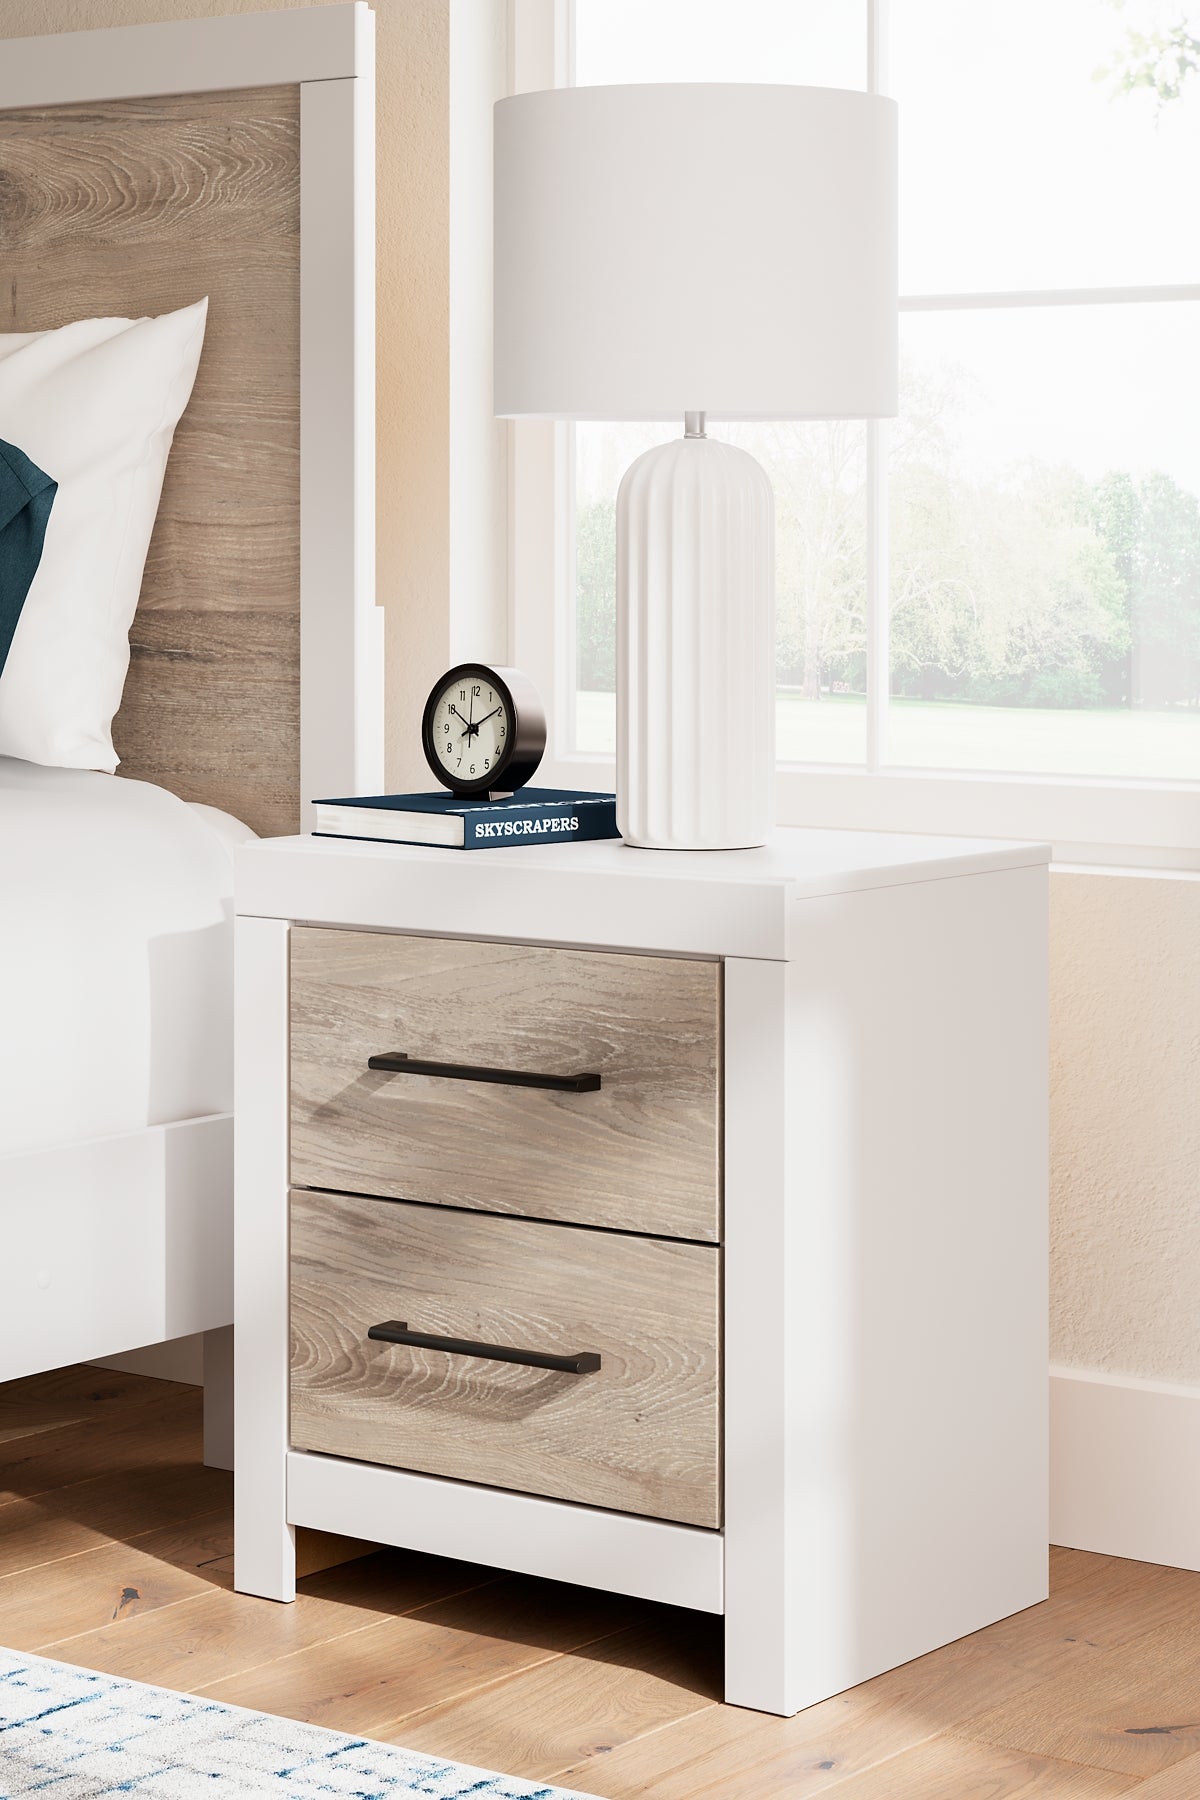 Charbitt Full Panel Bed with Mirrored Dresser and 2 Nightstands